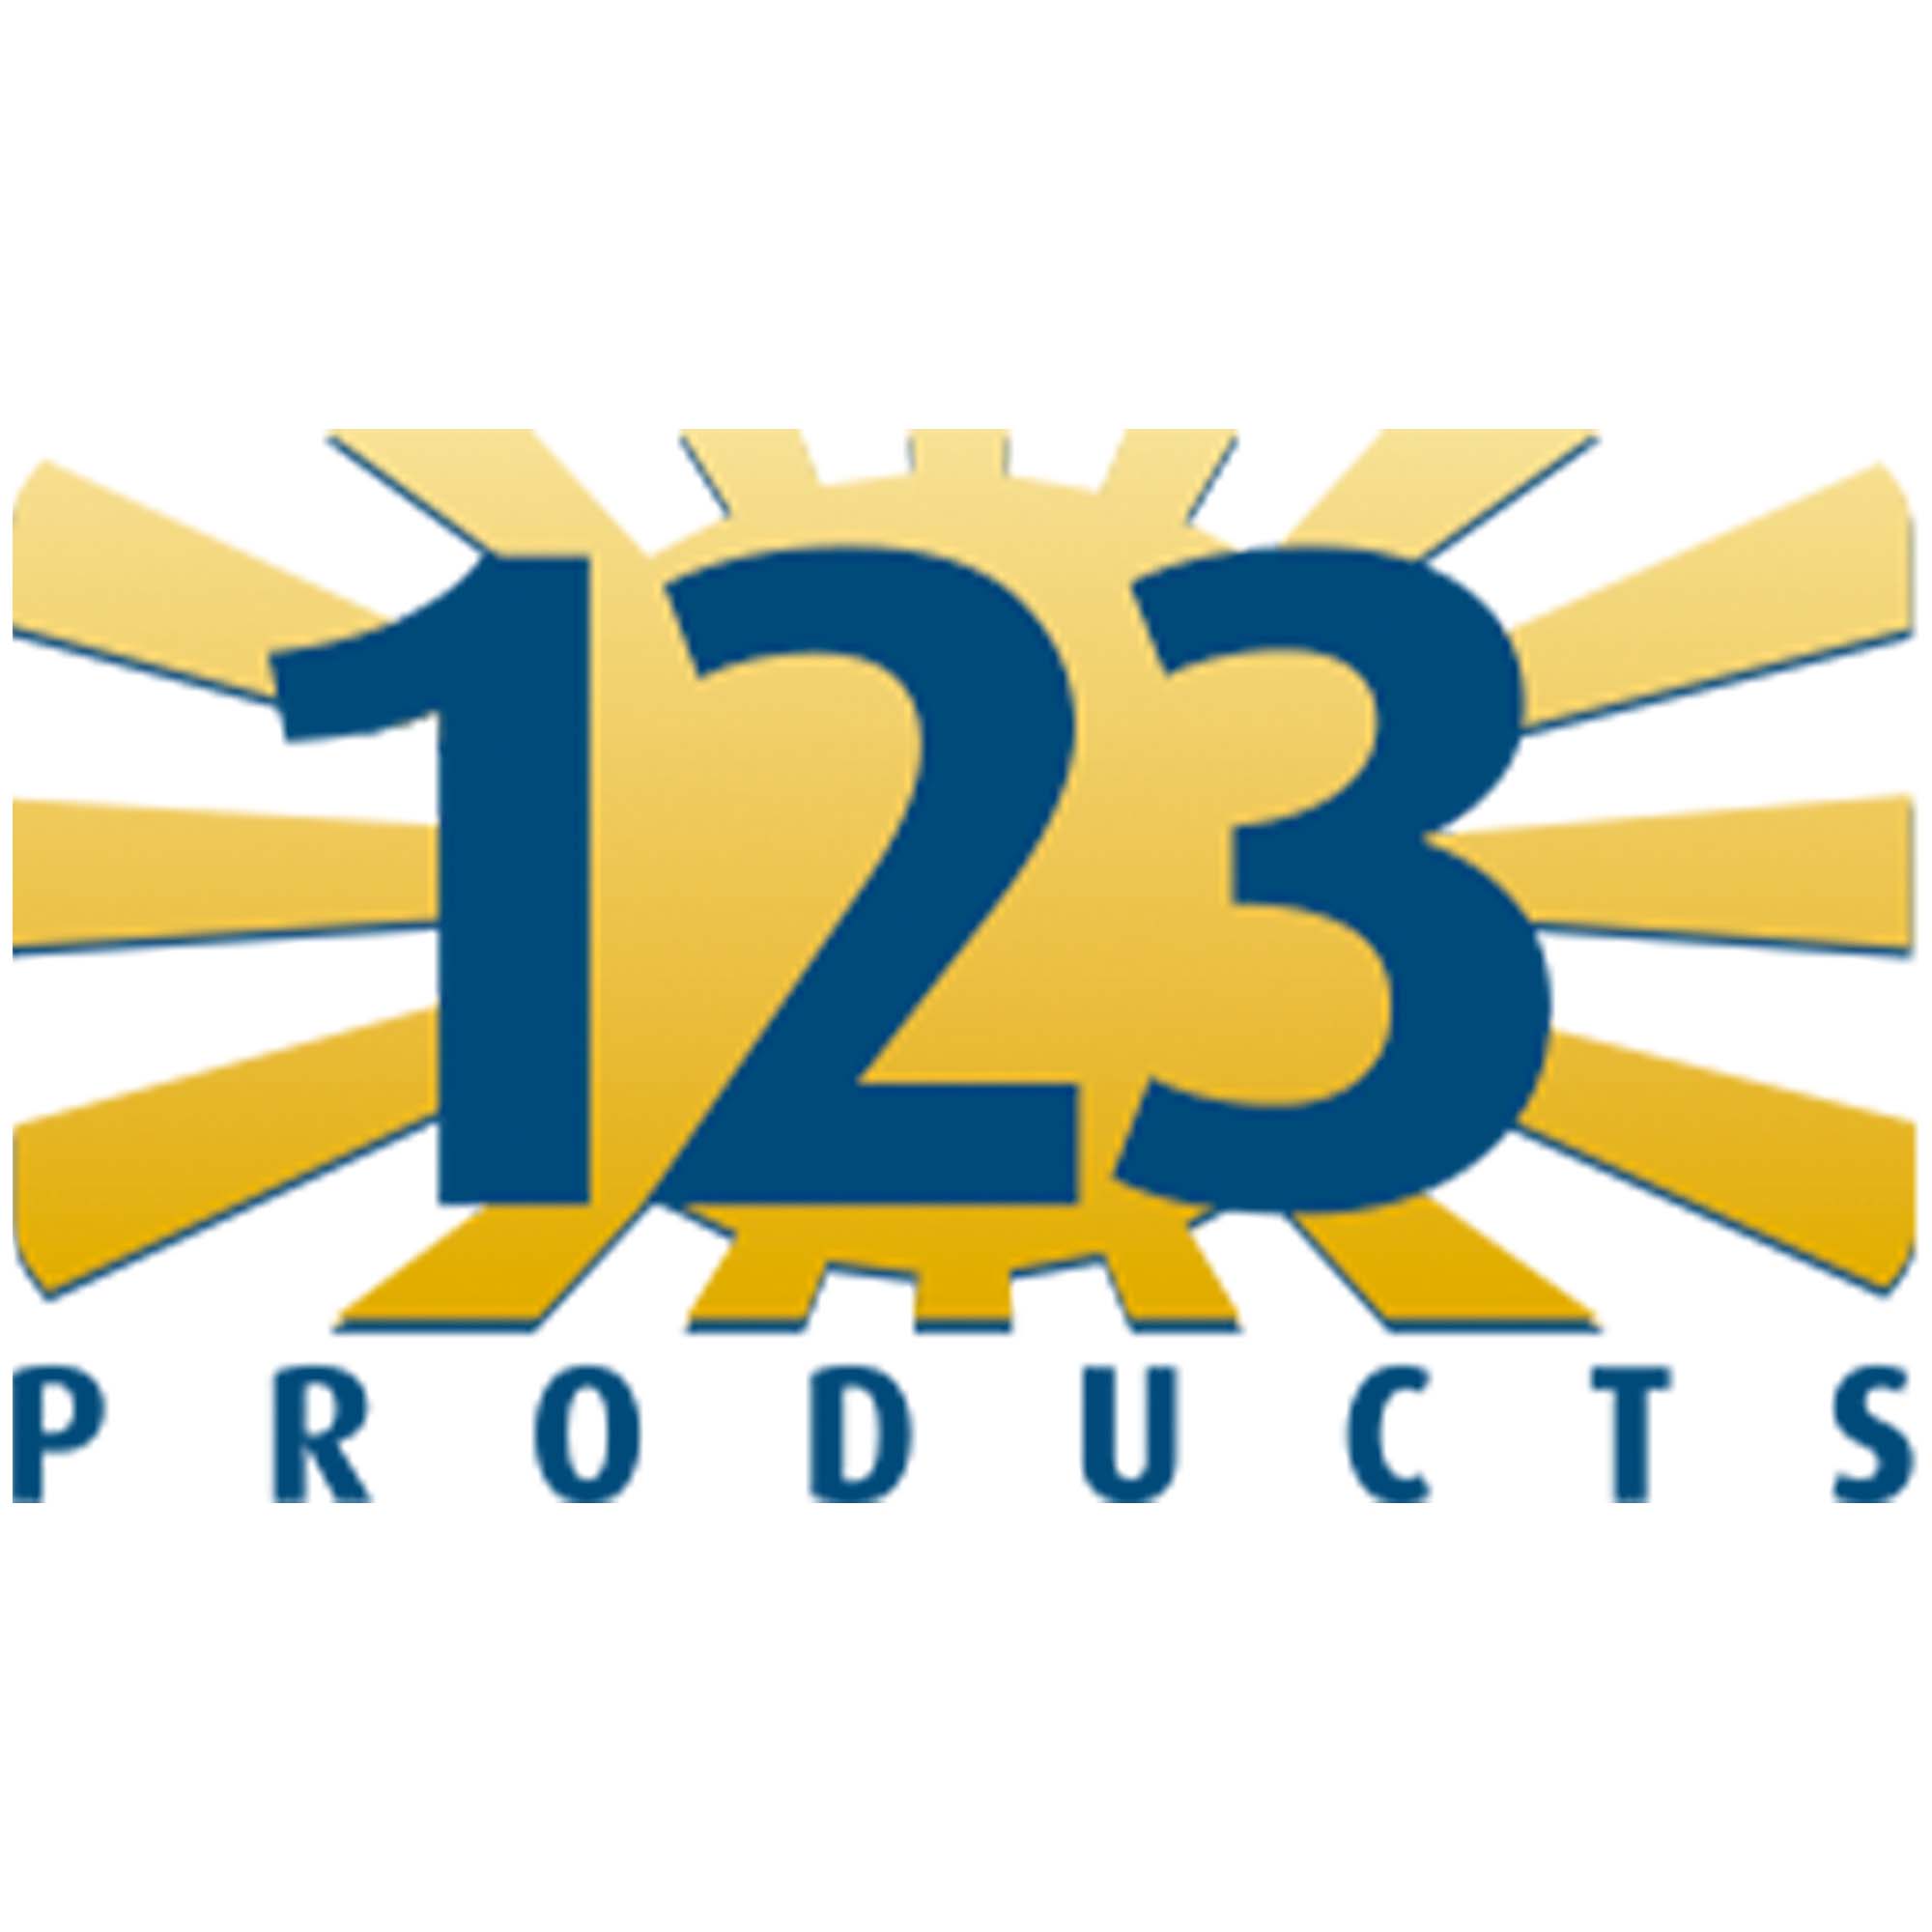 123 PRODUCTS